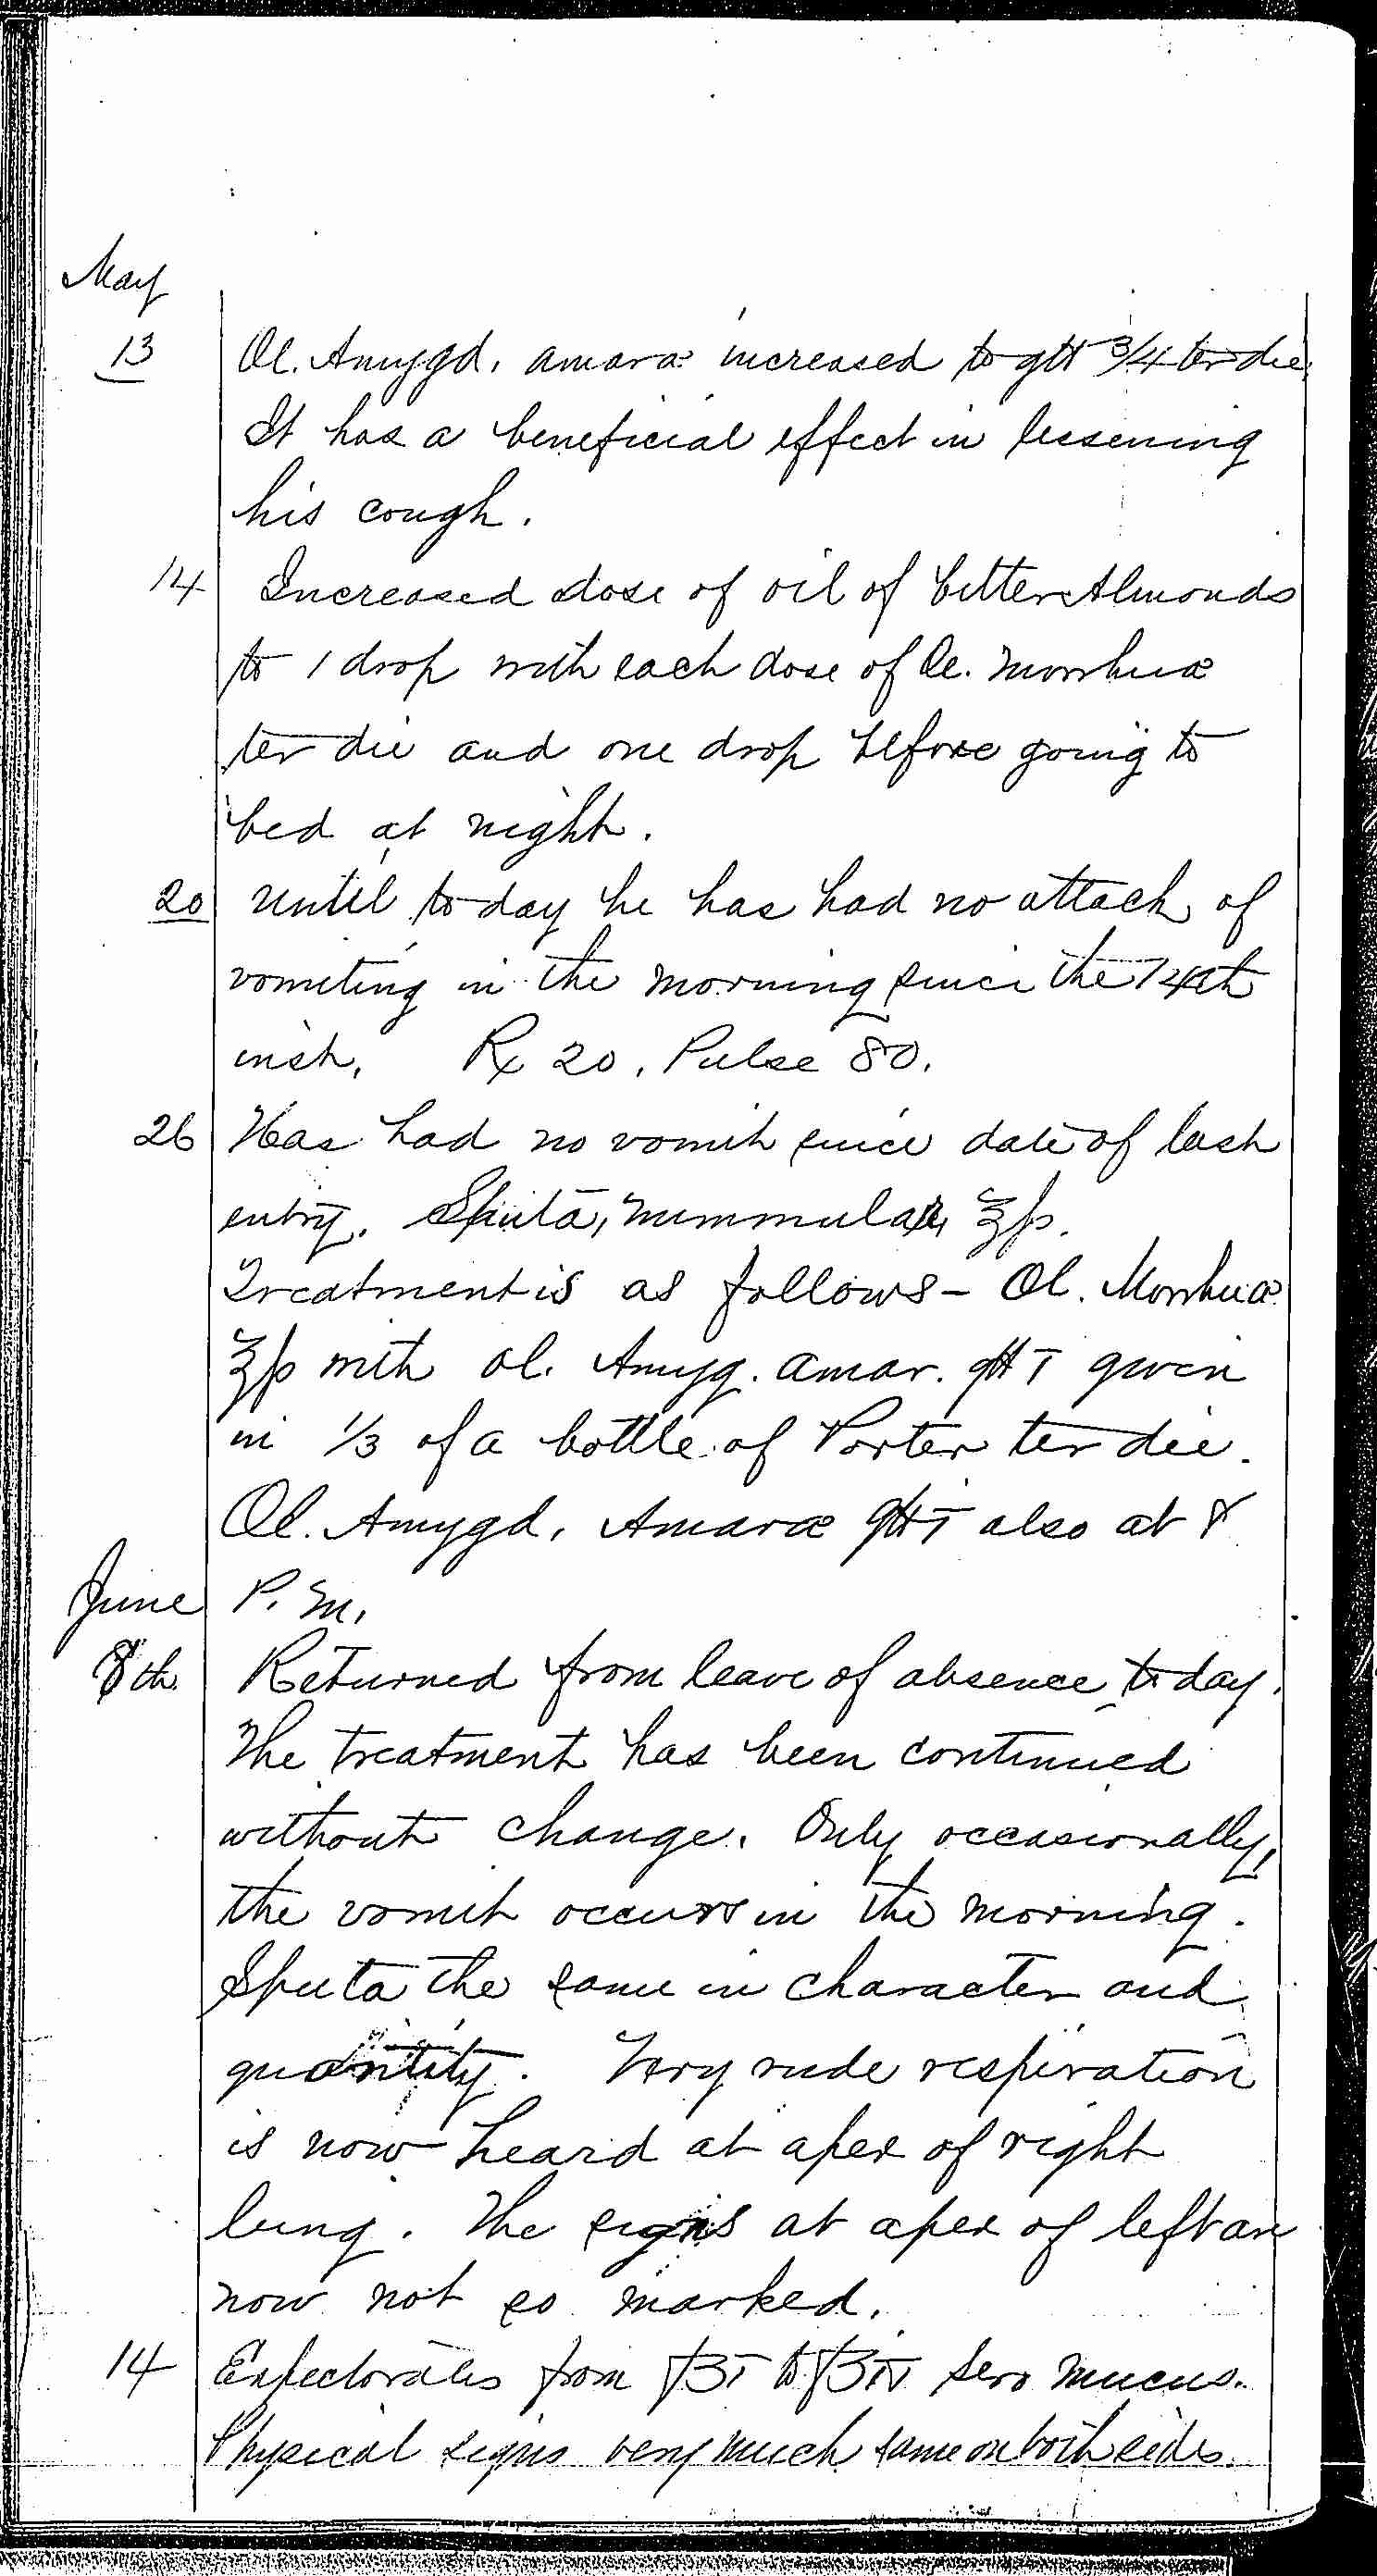 Entry for Hugh Riley (page 28 of 31) in the log Hospital Tickets and Case Papers - Naval Hospital - Washington, D.C. - 1868-69